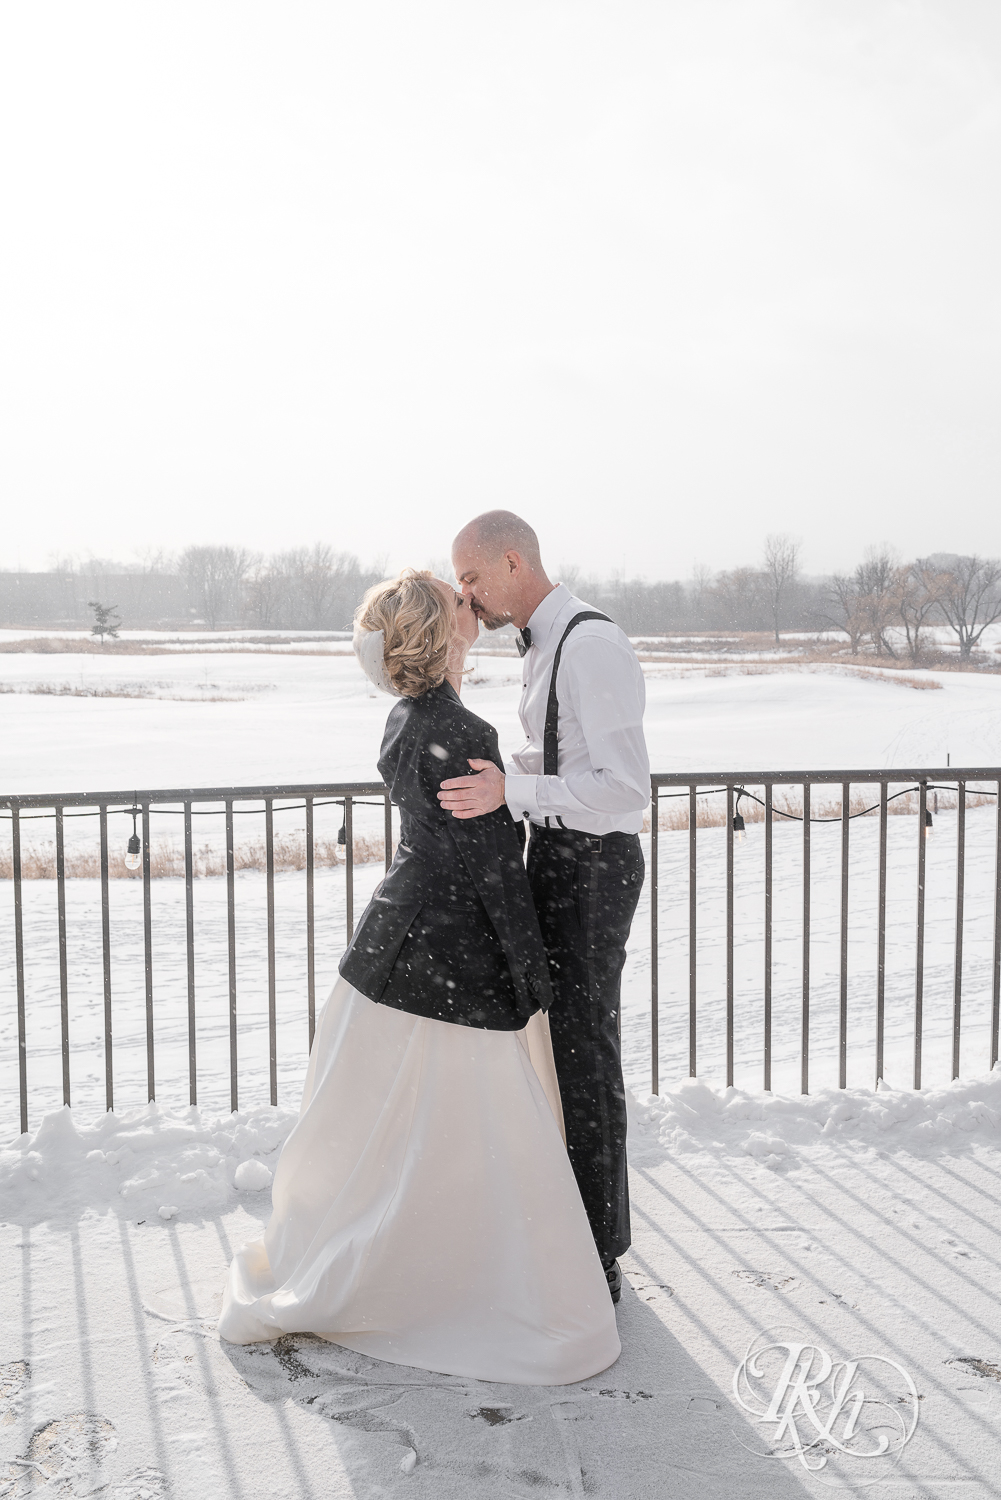 Bride and groom smiling in falling snow at Braemar Golf Course in Edina, Minnesota.